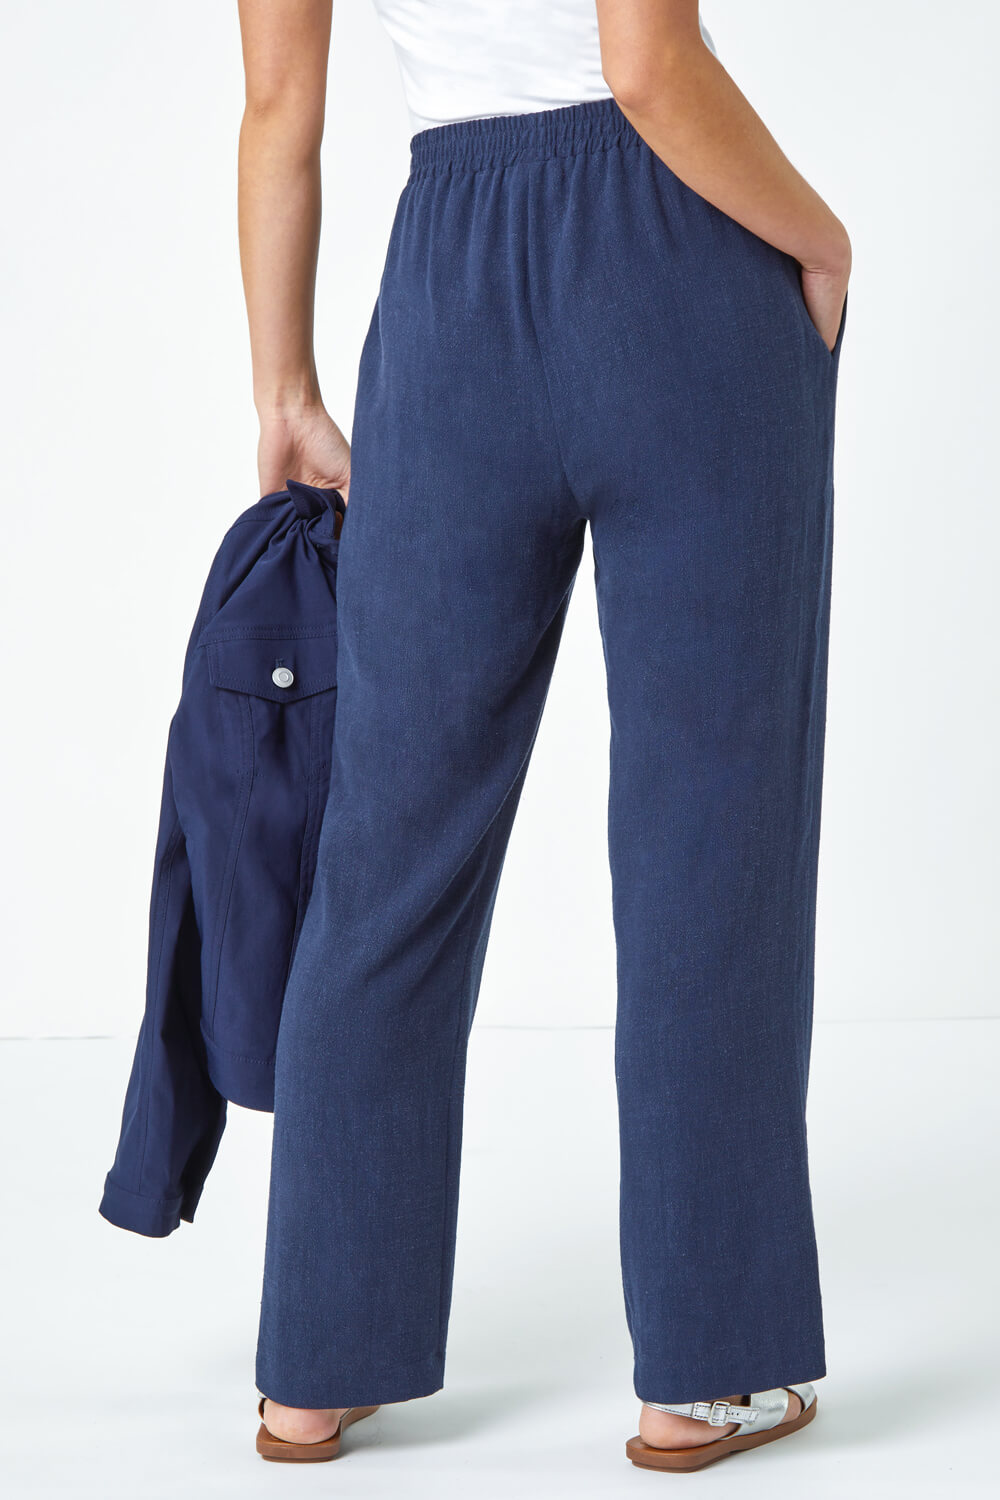 Navy  Petite Linen Mix Trousers, Image 3 of 5